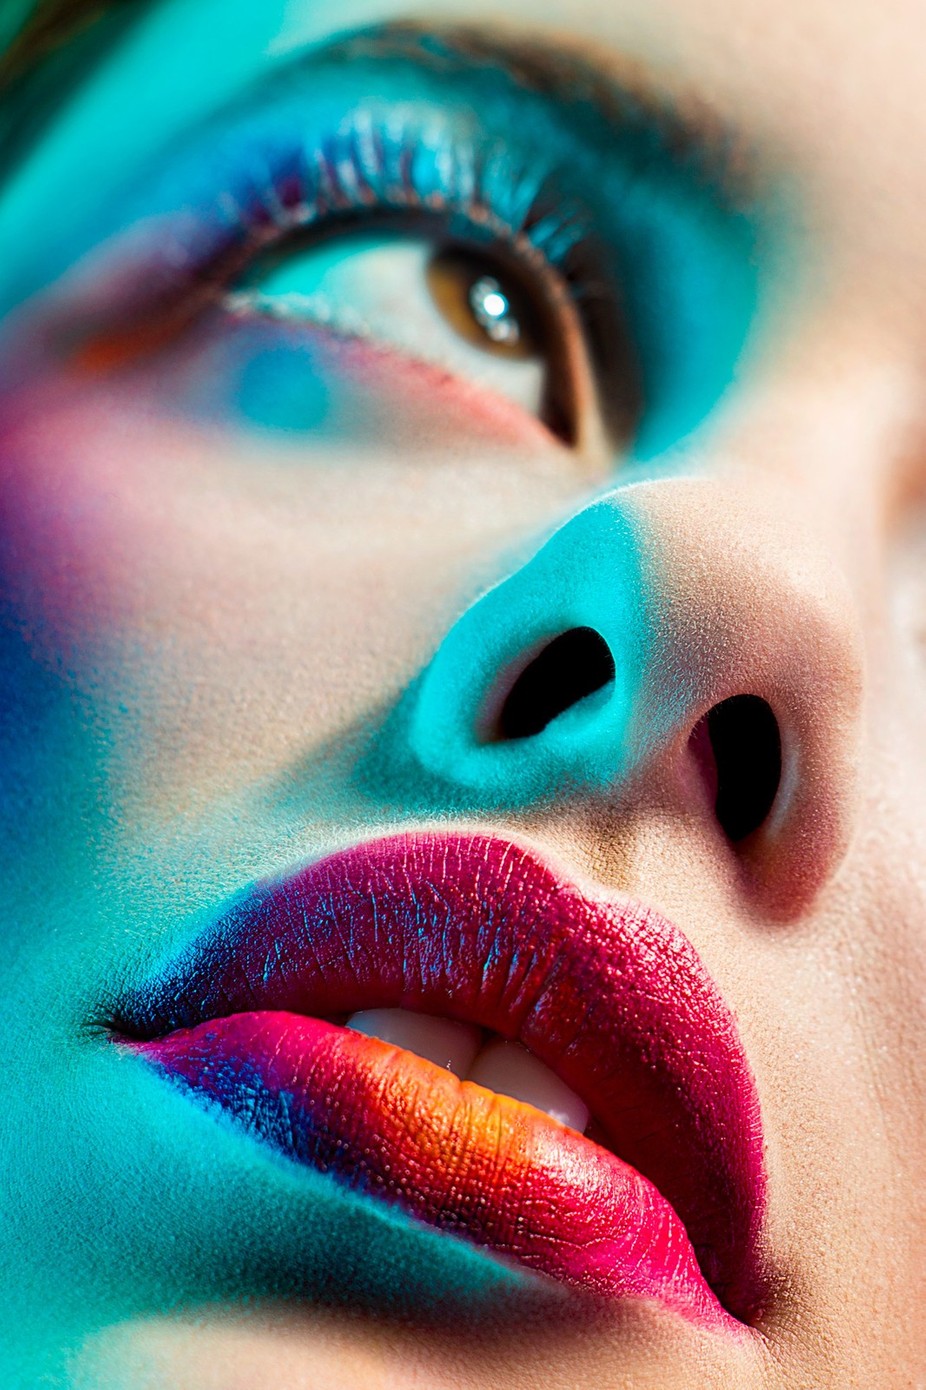 Natalia´s Lips by guilhermeescosteguy - Bright And Colorful Photo Contest